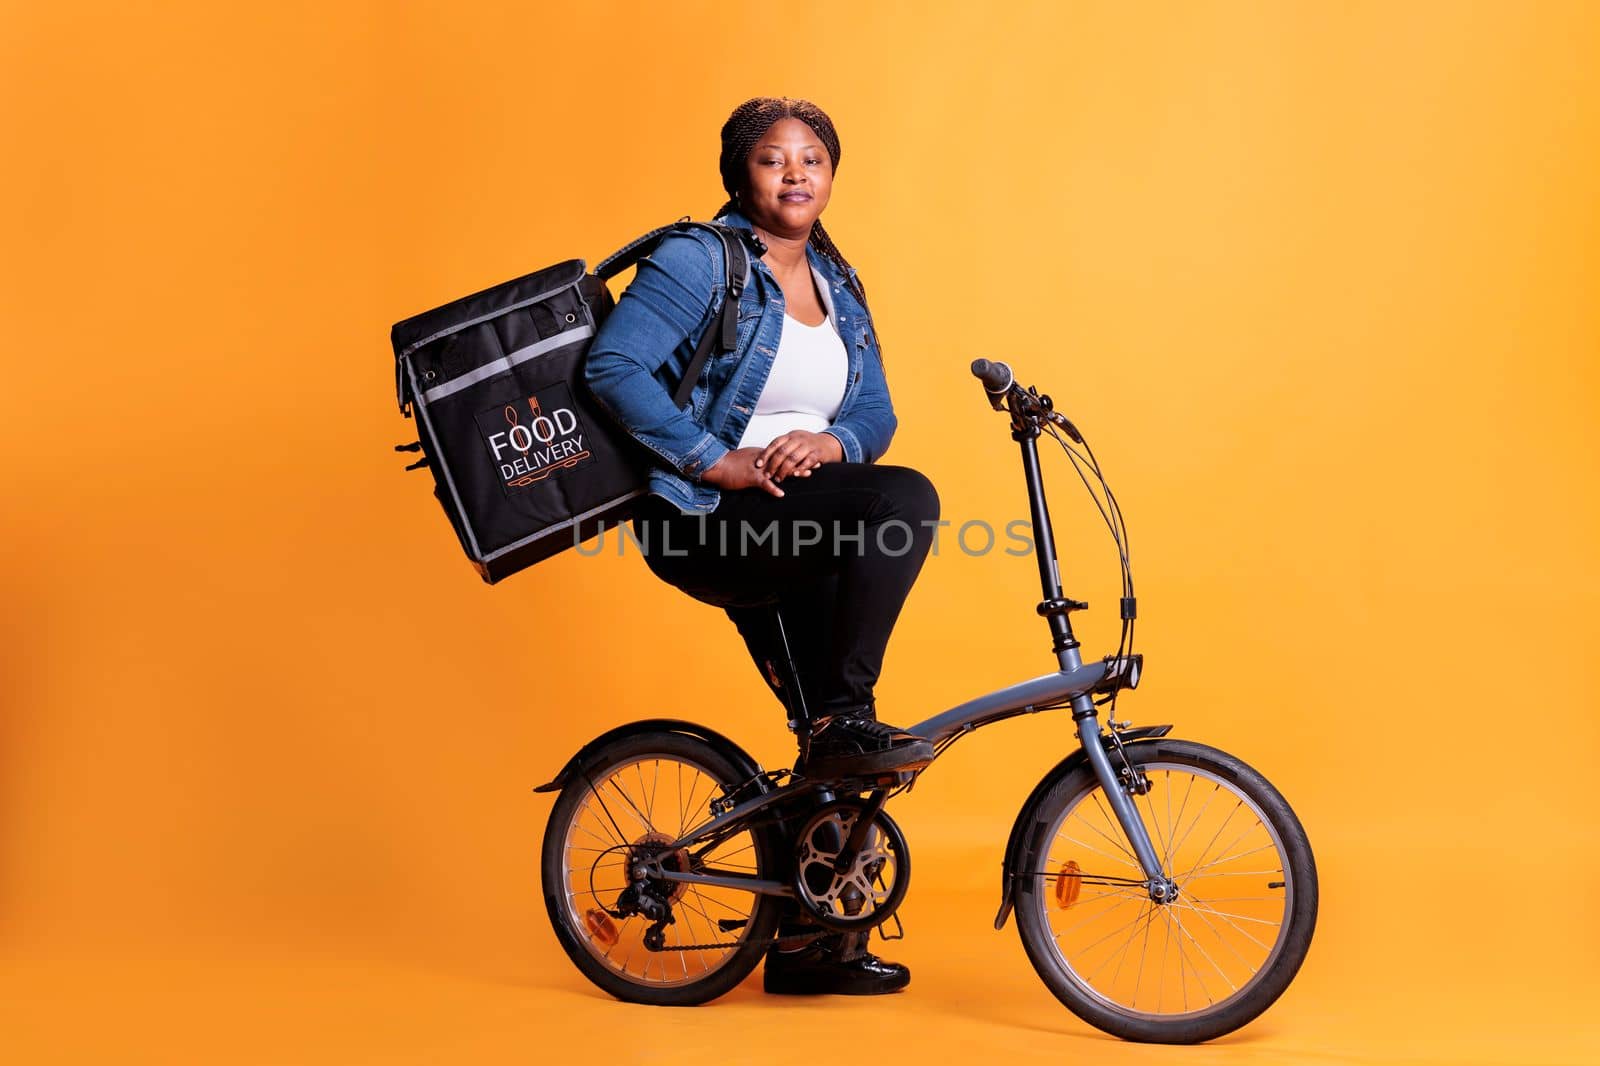 Pizzeria deliverywoman carrying food takeaway backpack while riding bicycle in studio with yellow background, delivering pizza order for dinner. Food transportation service and takeaway concept